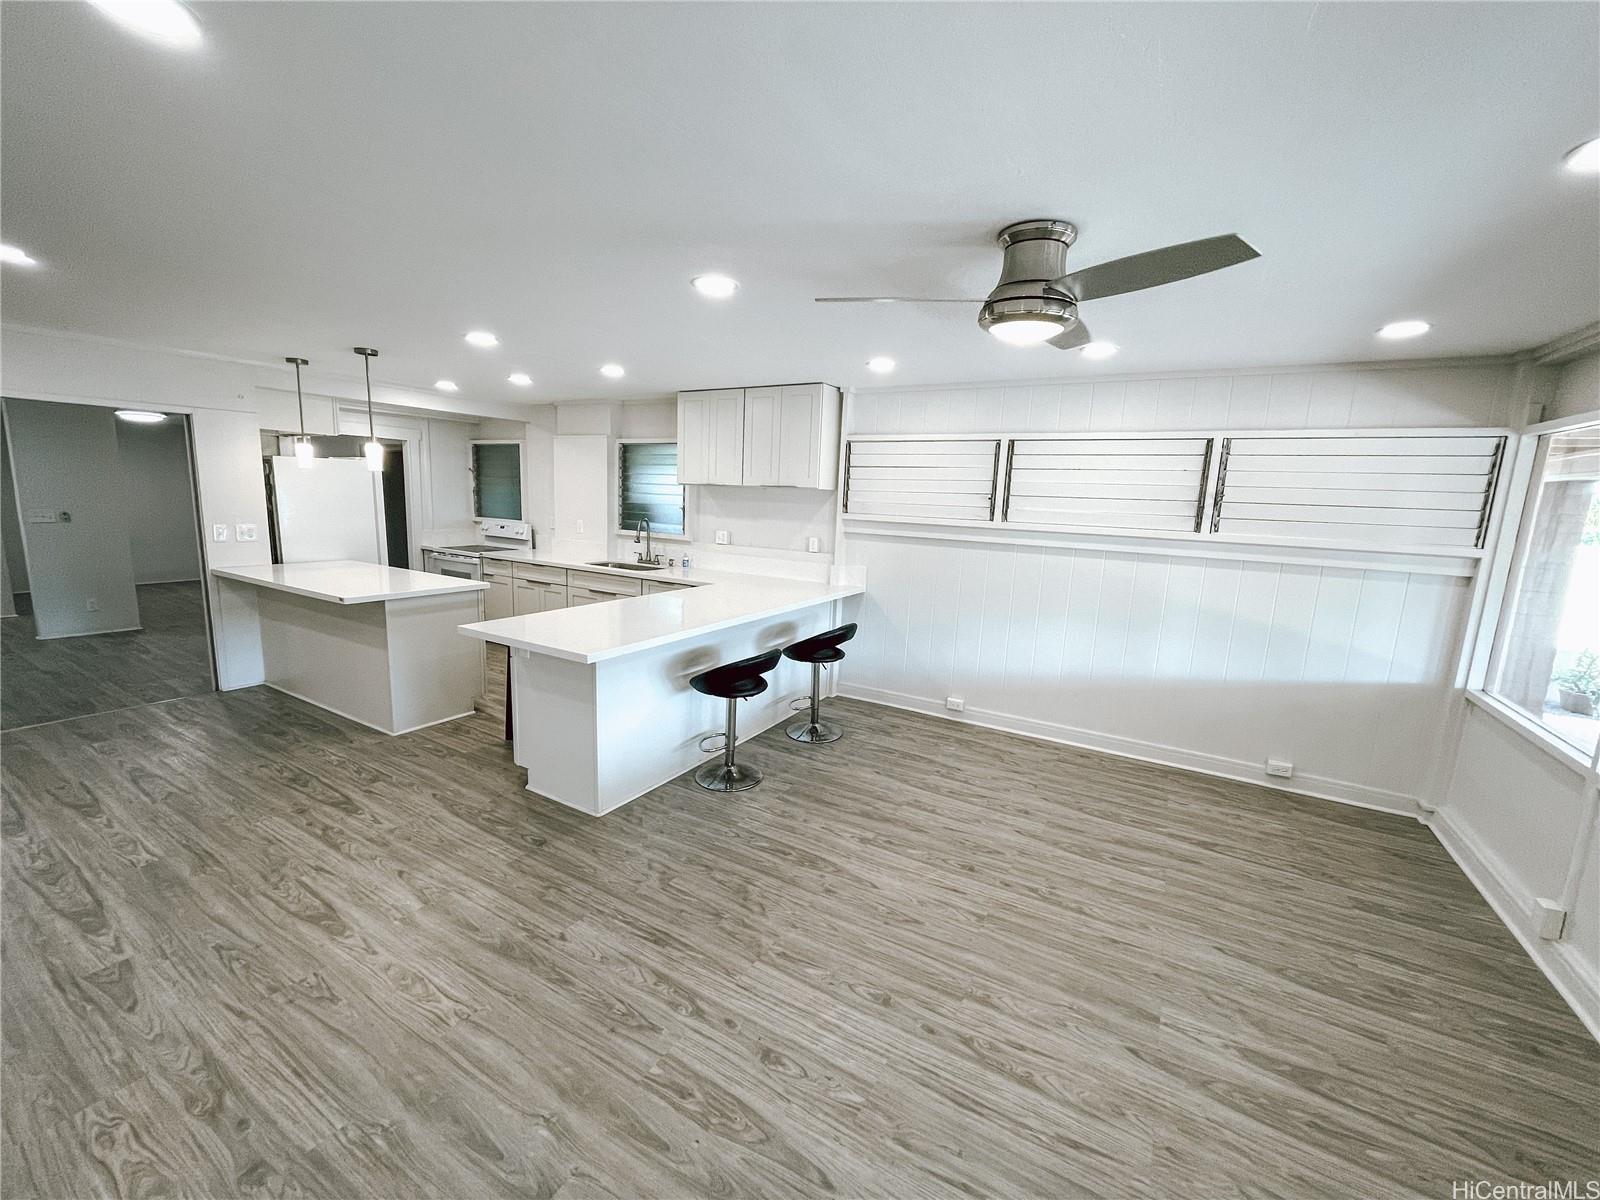 a living room with kitchen island stainless steel appliances wooden floor and a view of kitchen